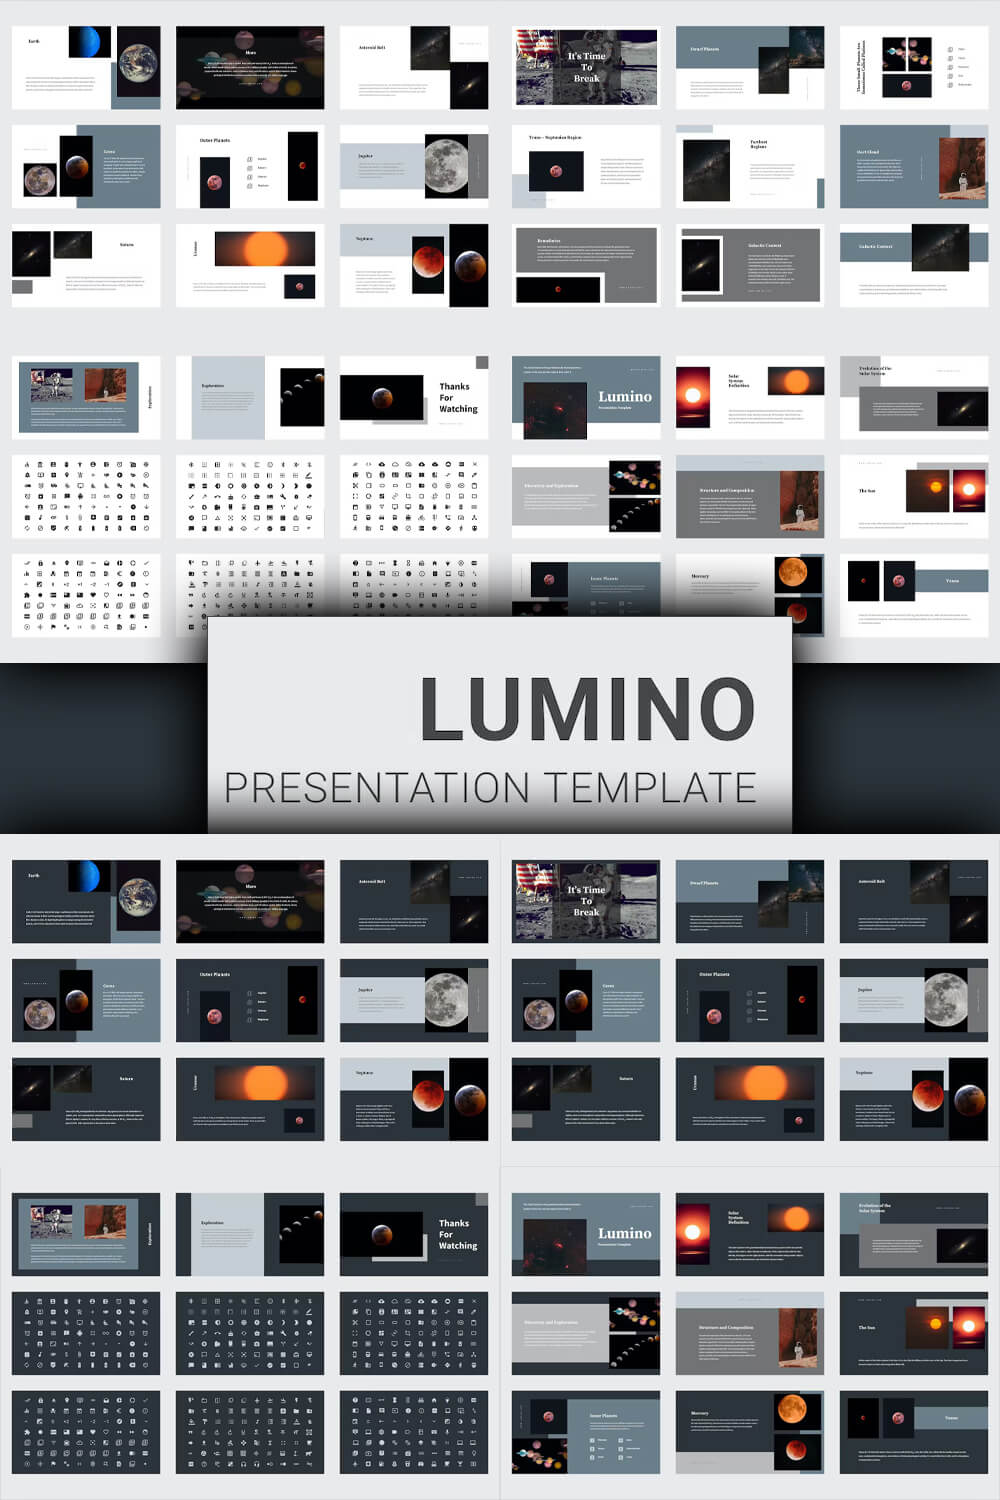 Information about planets of Lumino presentation template.